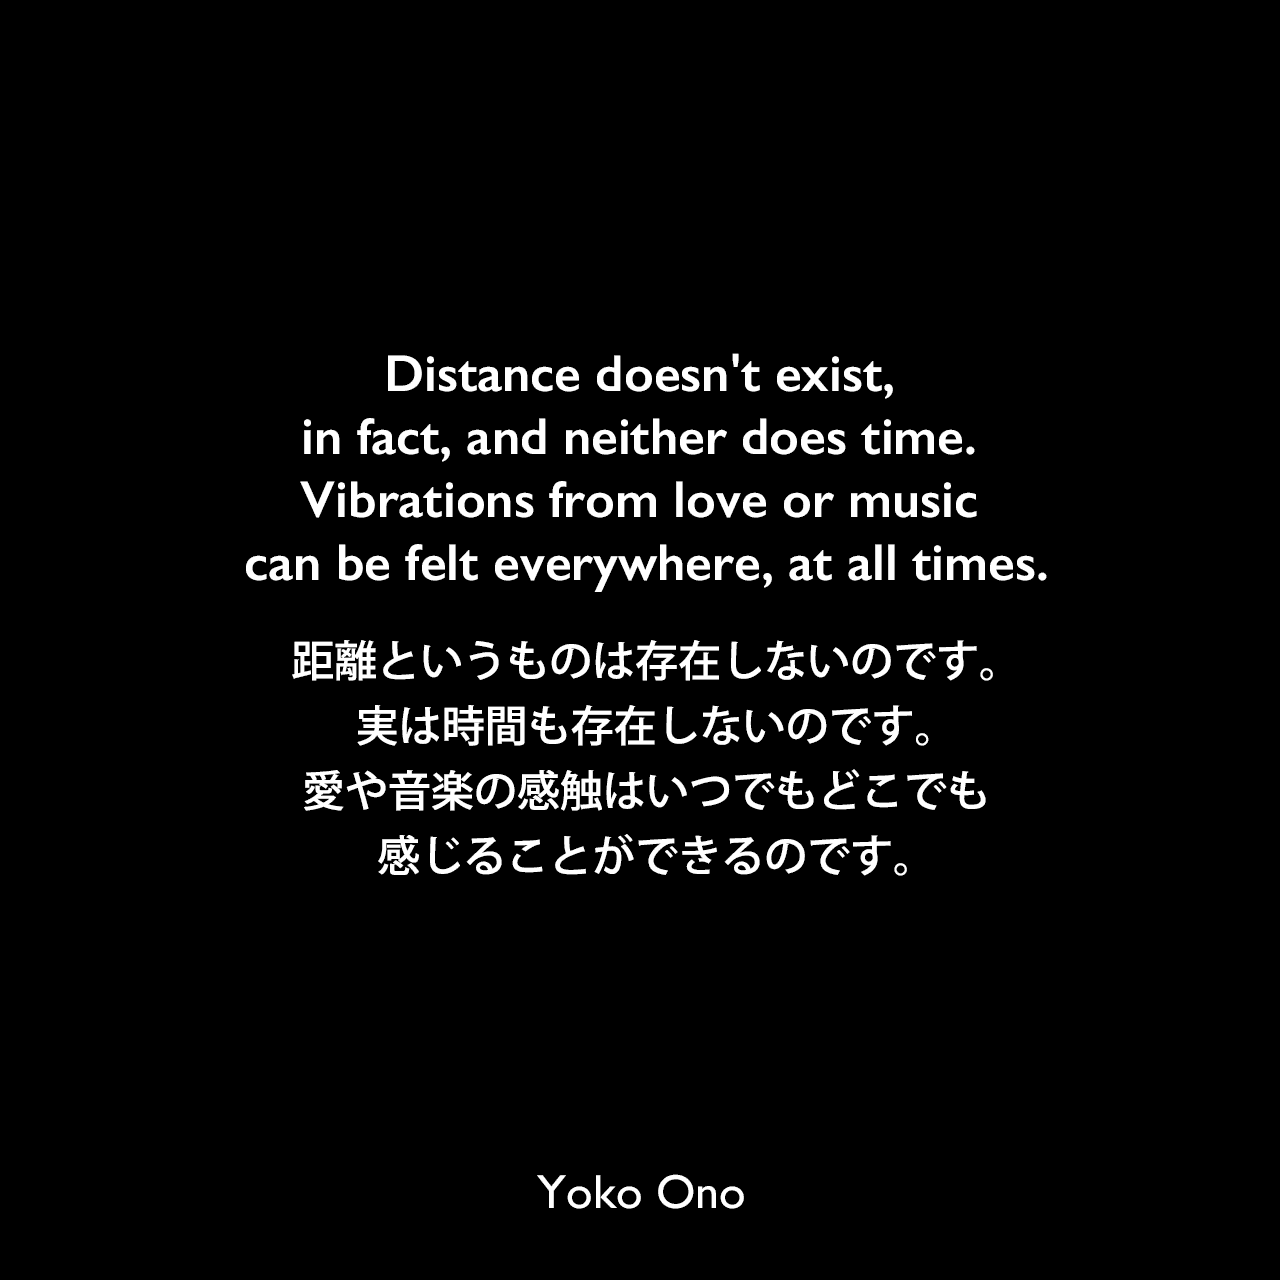 Distance doesn't exist, in fact, and neither does time. Vibrations from love or music can be felt everywhere, at all times.距離というものは存在しないのです。実は時間も存在しないのです。愛や音楽の感触はいつでもどこでも感じることができるのです。Yoko Ono